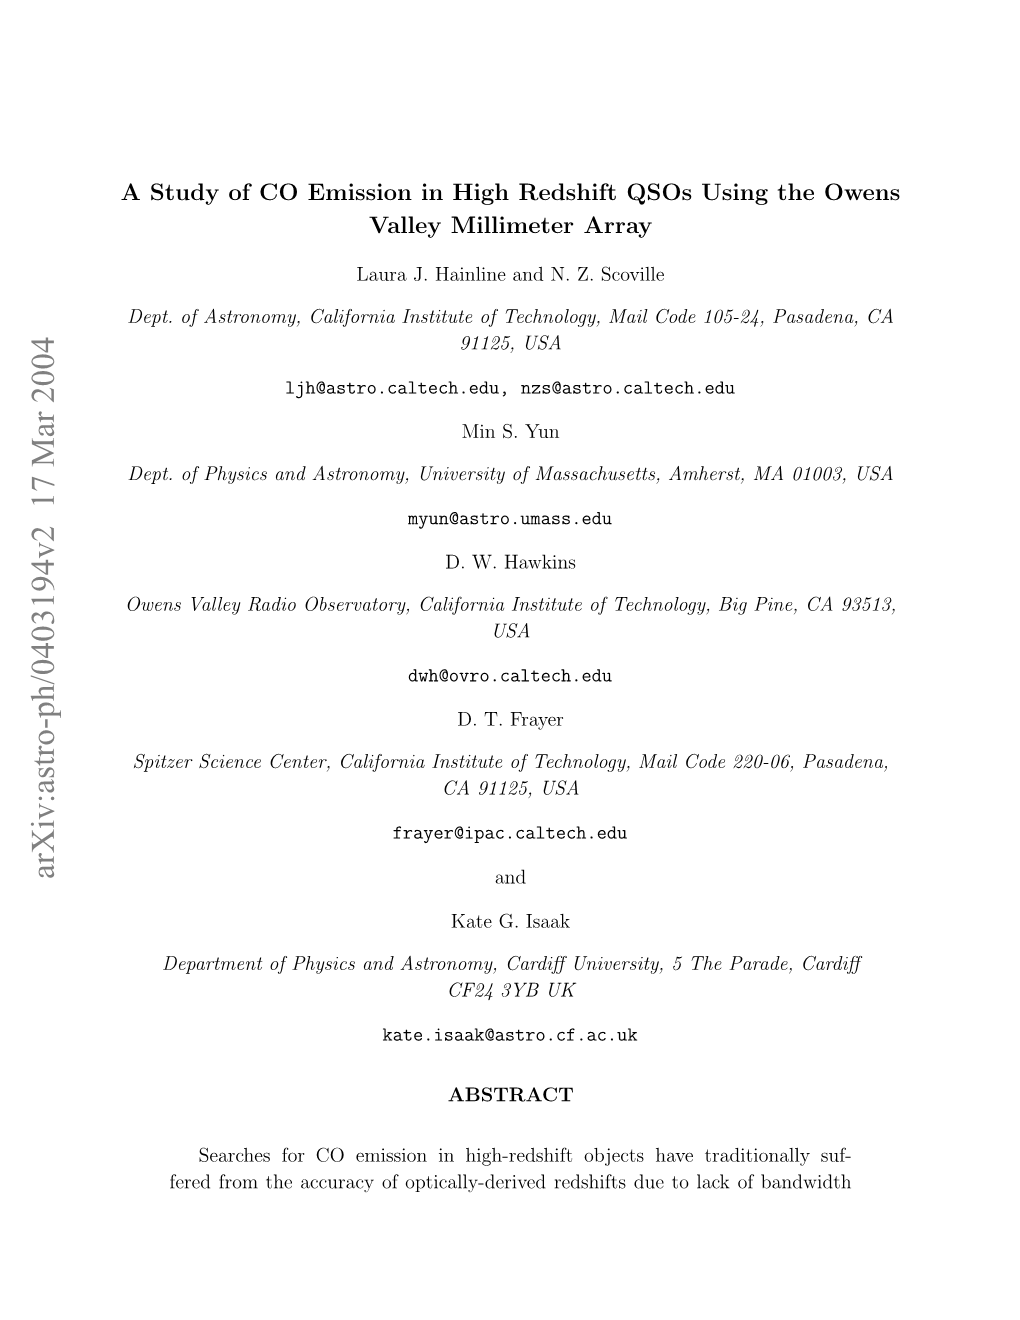 A Study of CO Emission in High Redshift Qsos Using the Owens